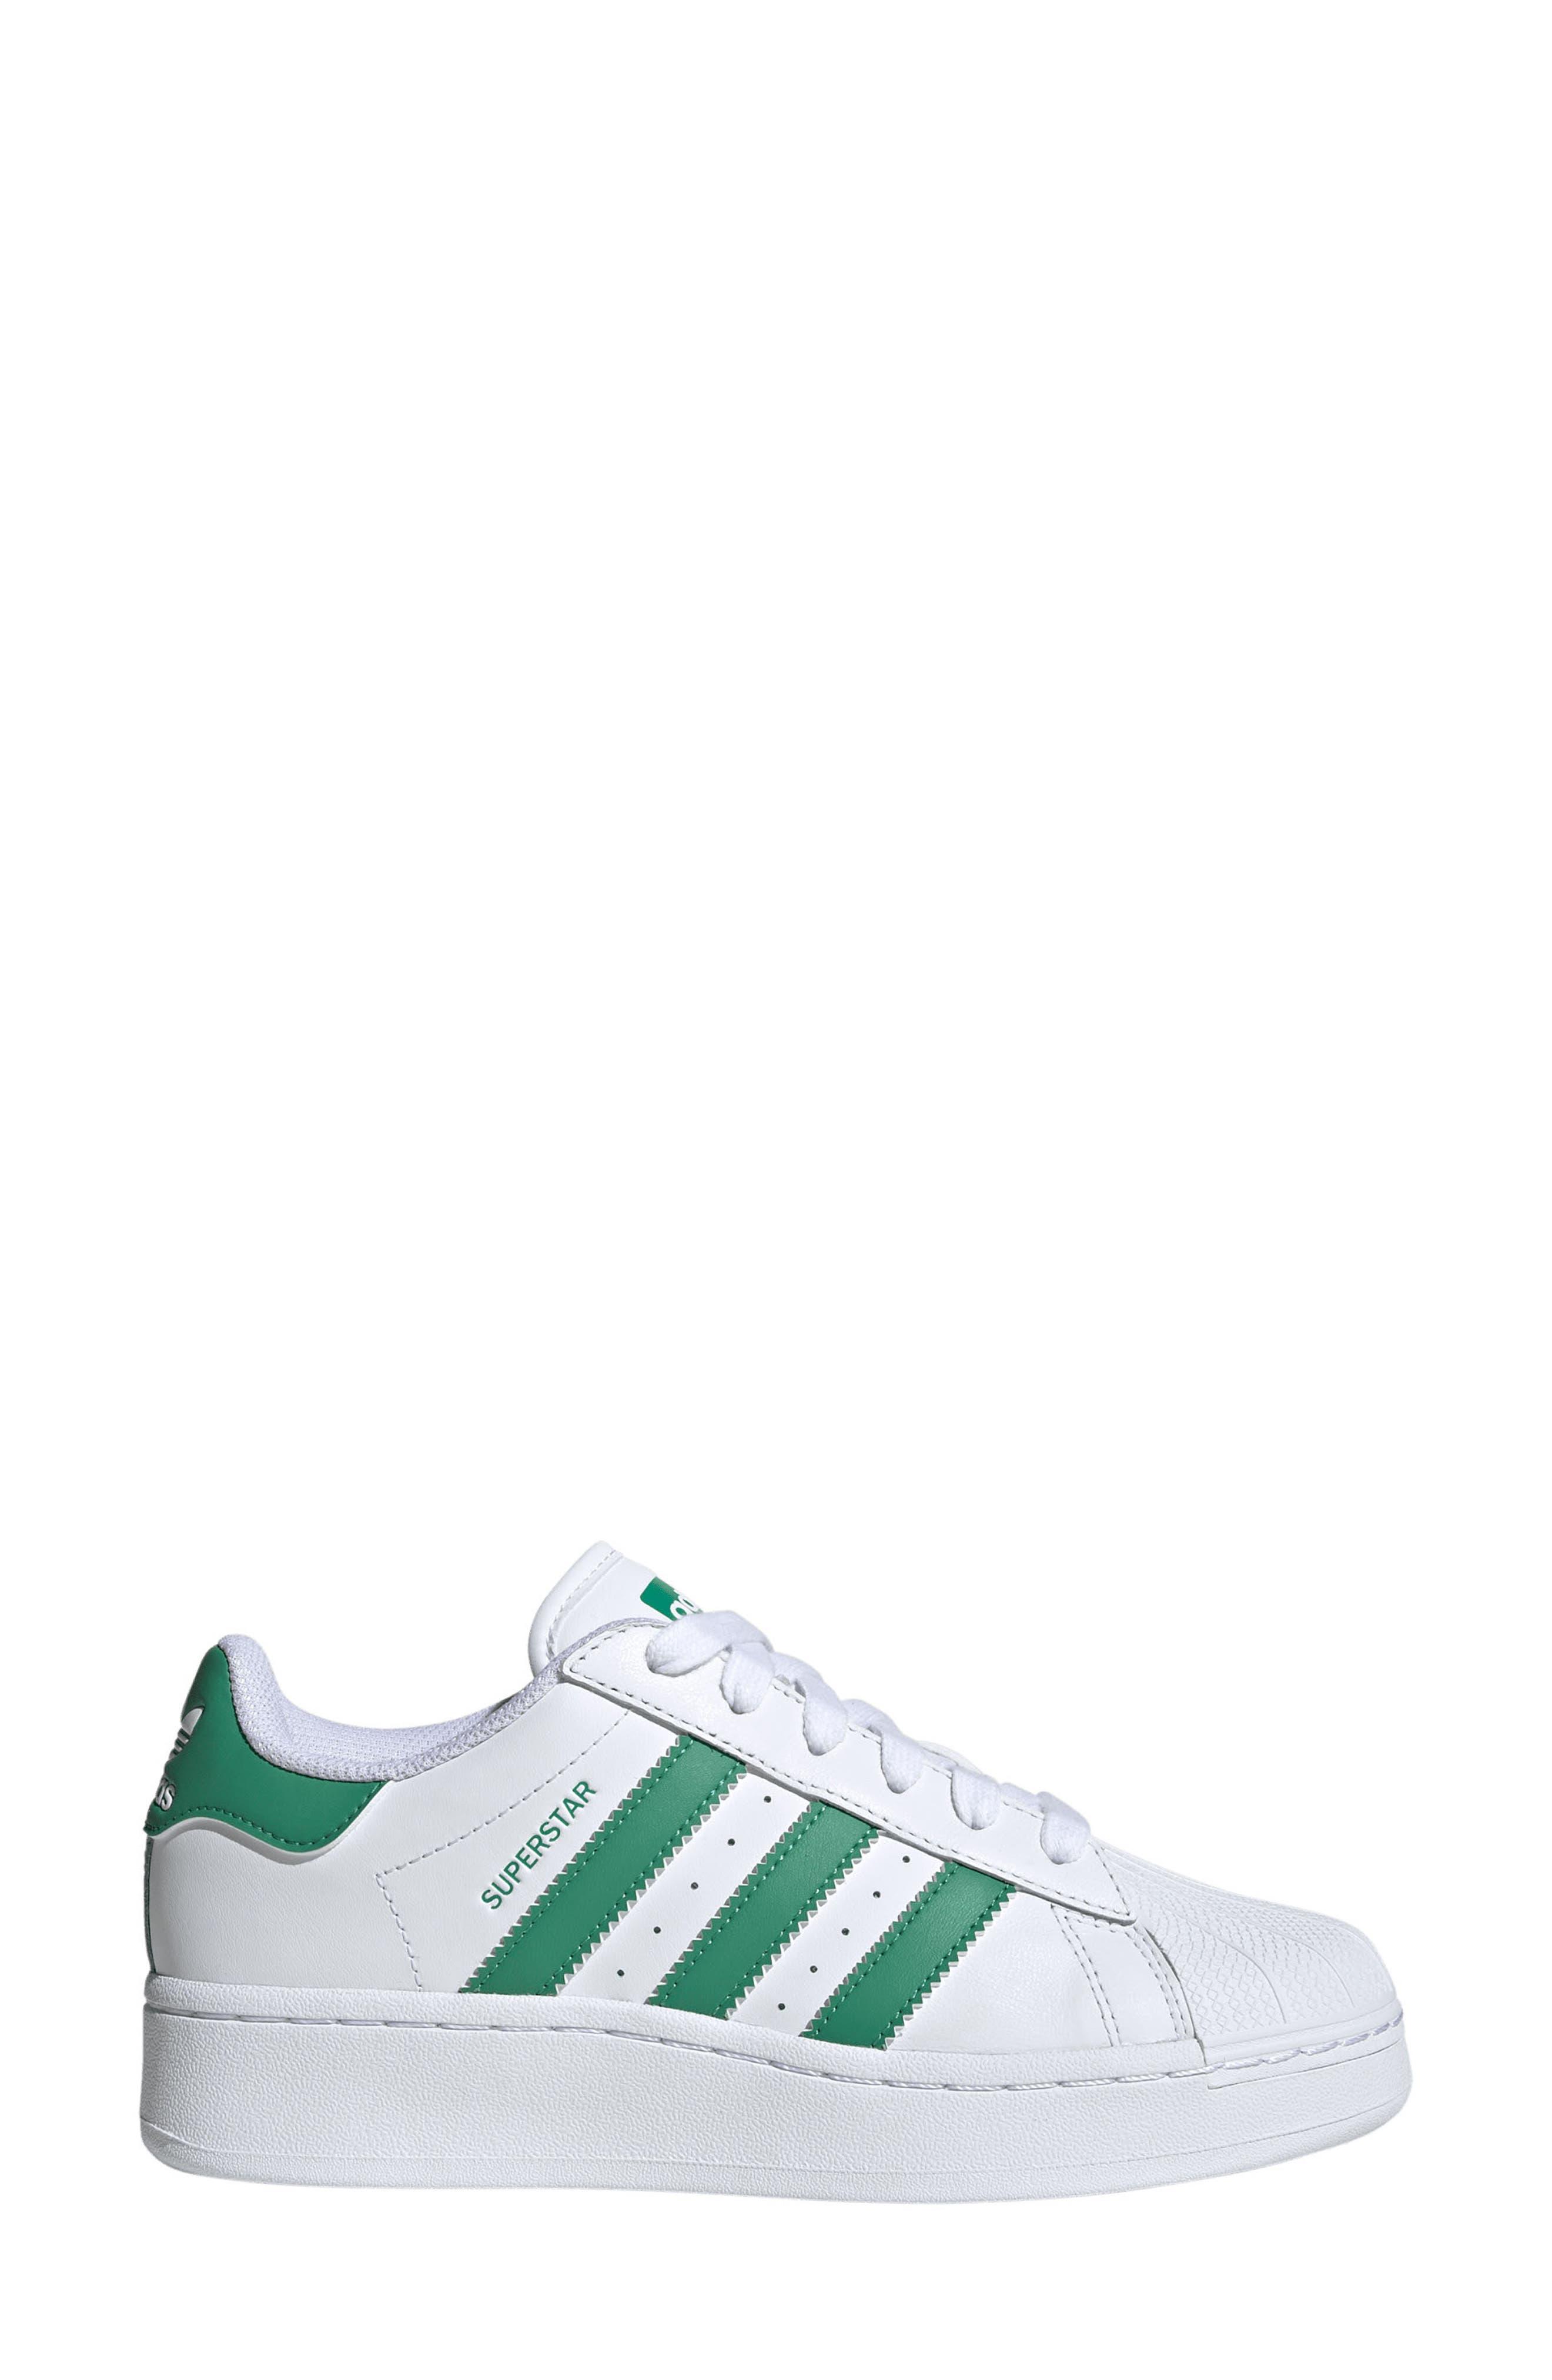 adidas Superstar Xlg Sneaker in White | Lyst